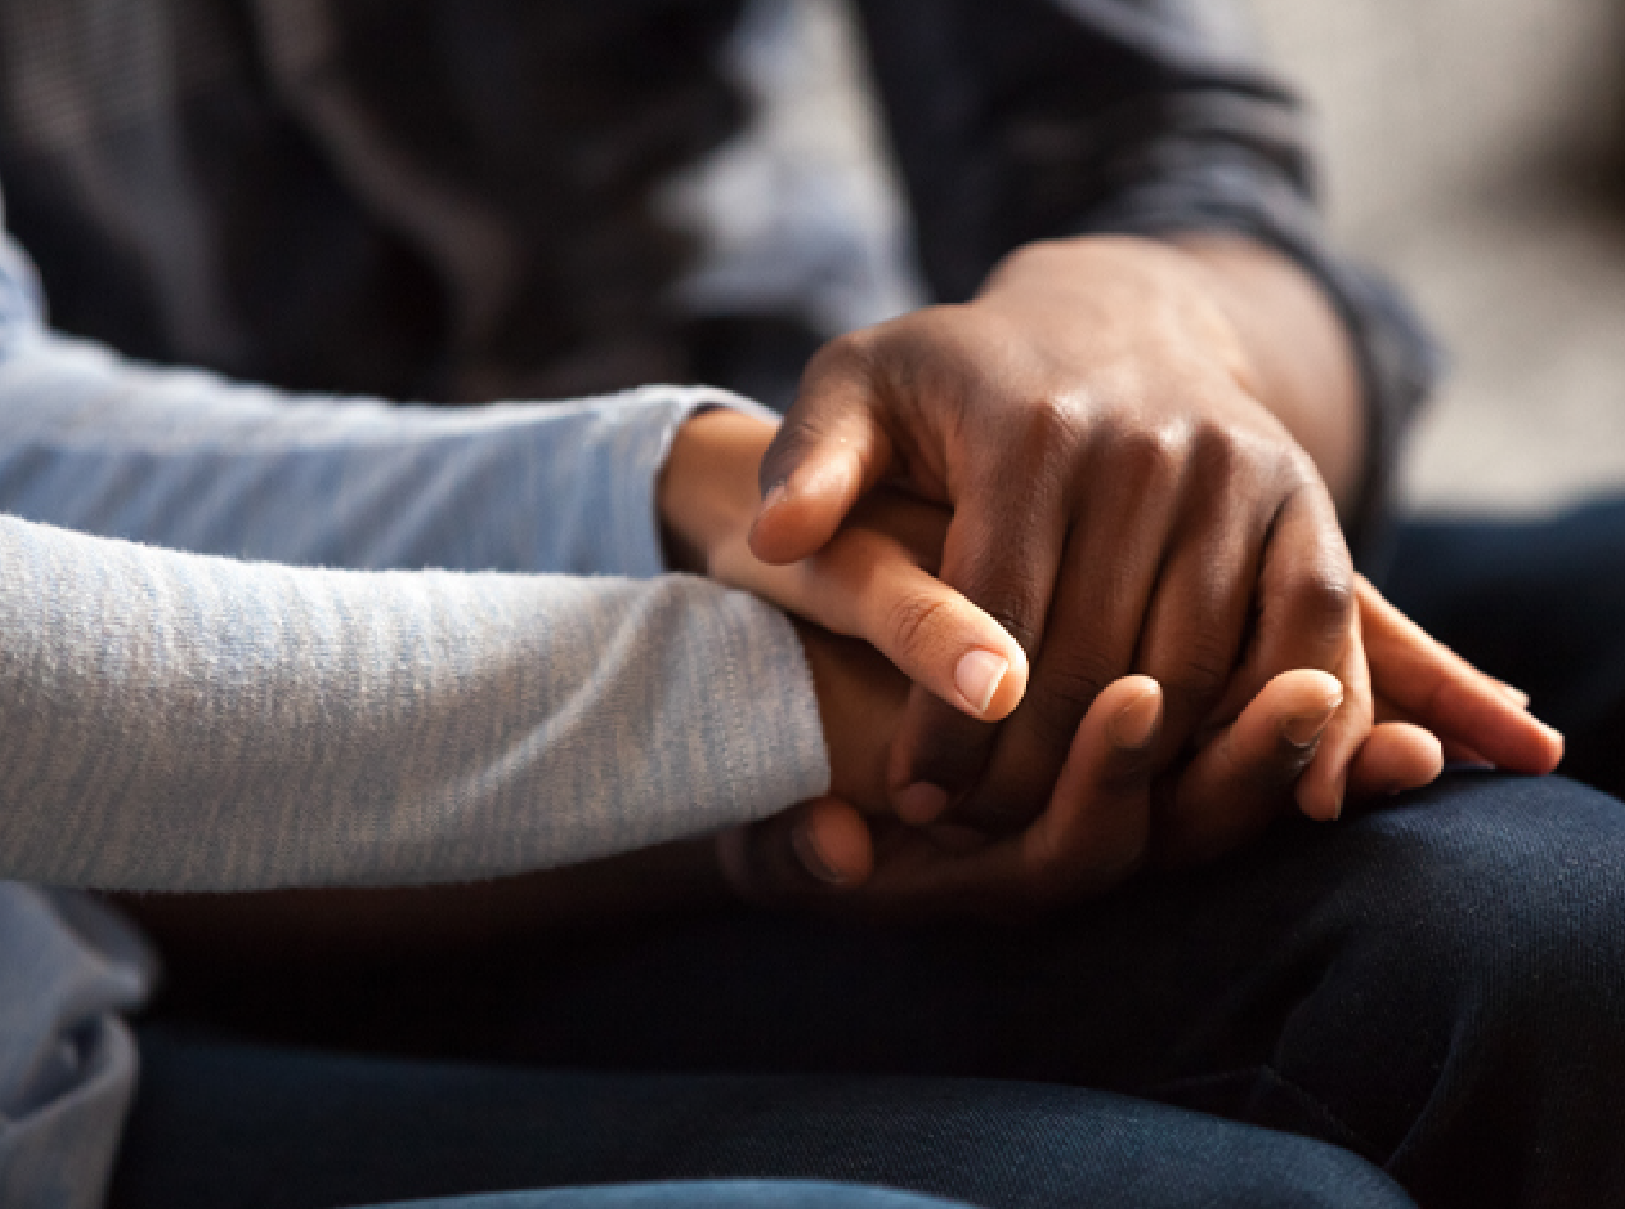 colleagues comfort one another by holding hands during difficult, racial and diversity discussions